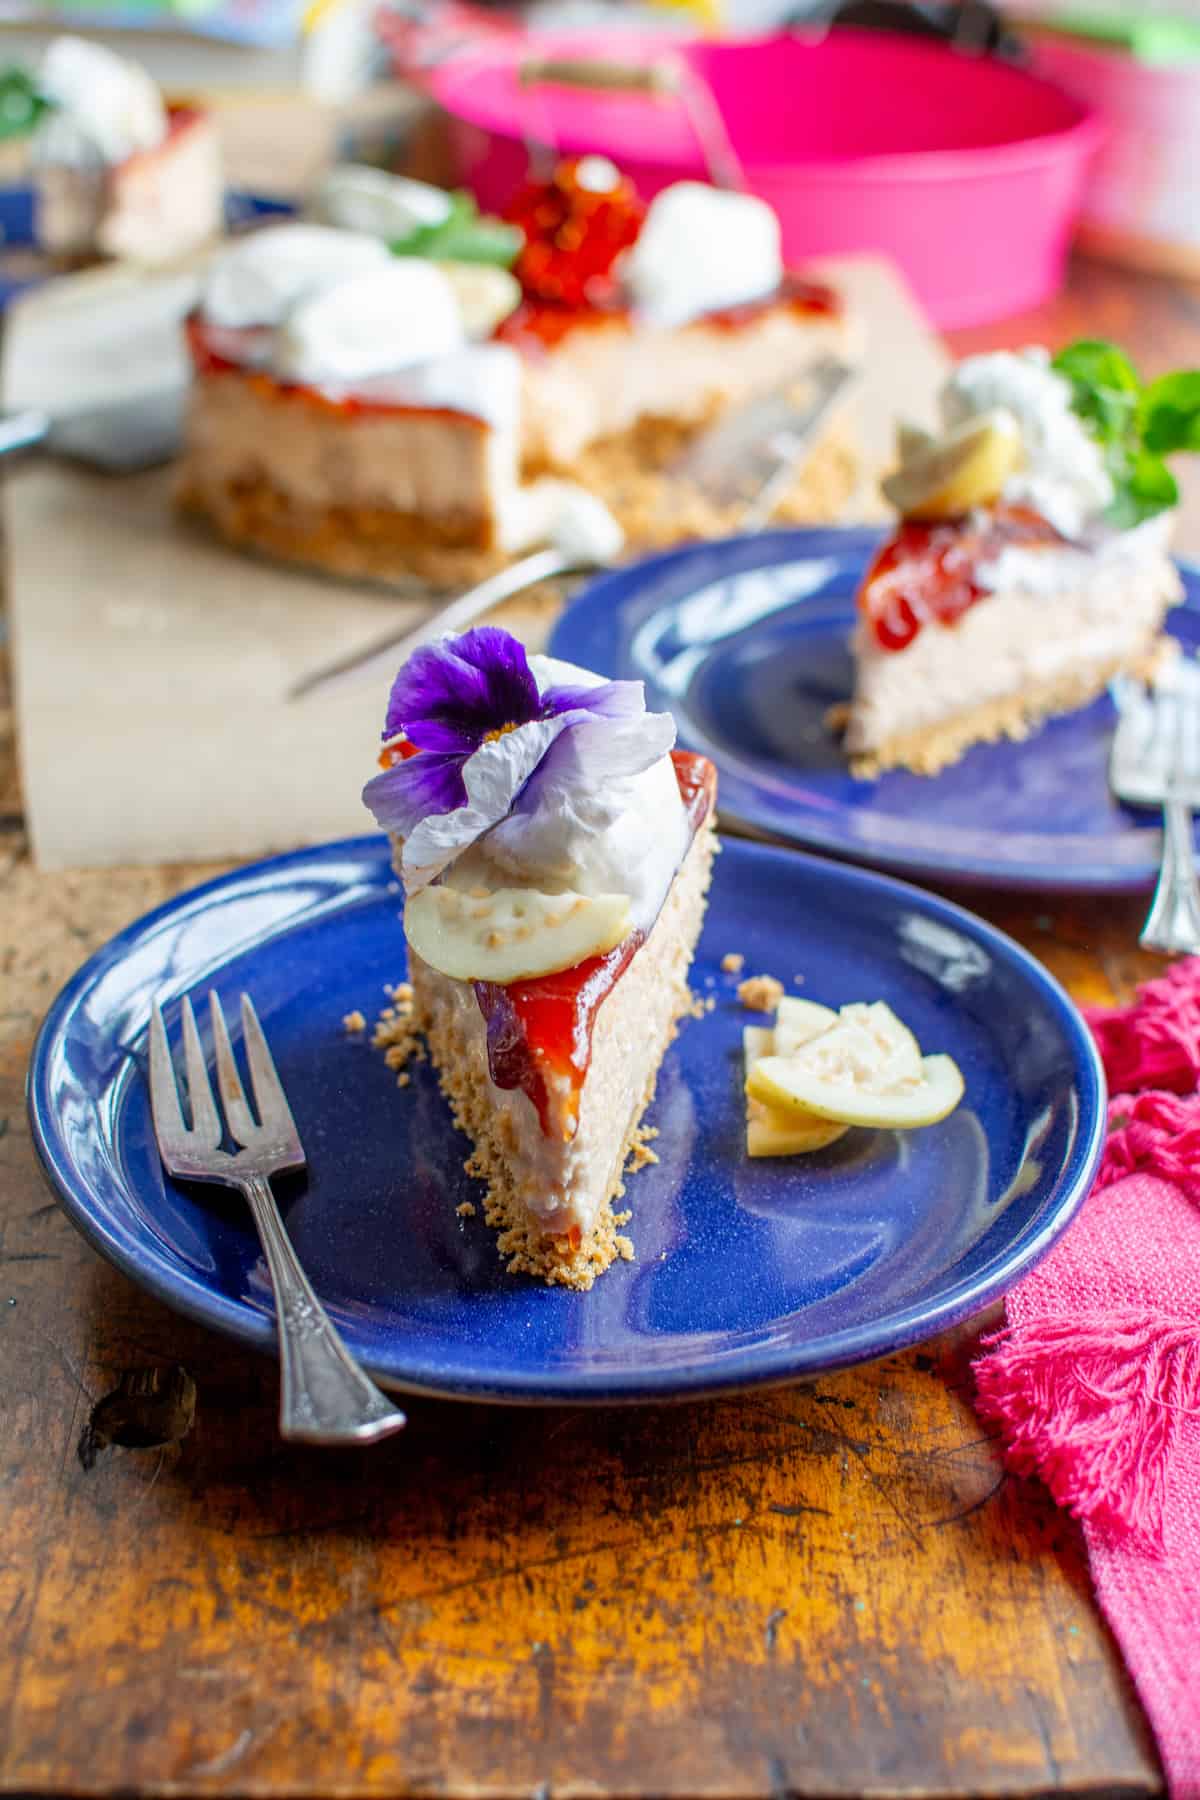 A slice of guava cheesecake on a blue plate with a fork on the plate.